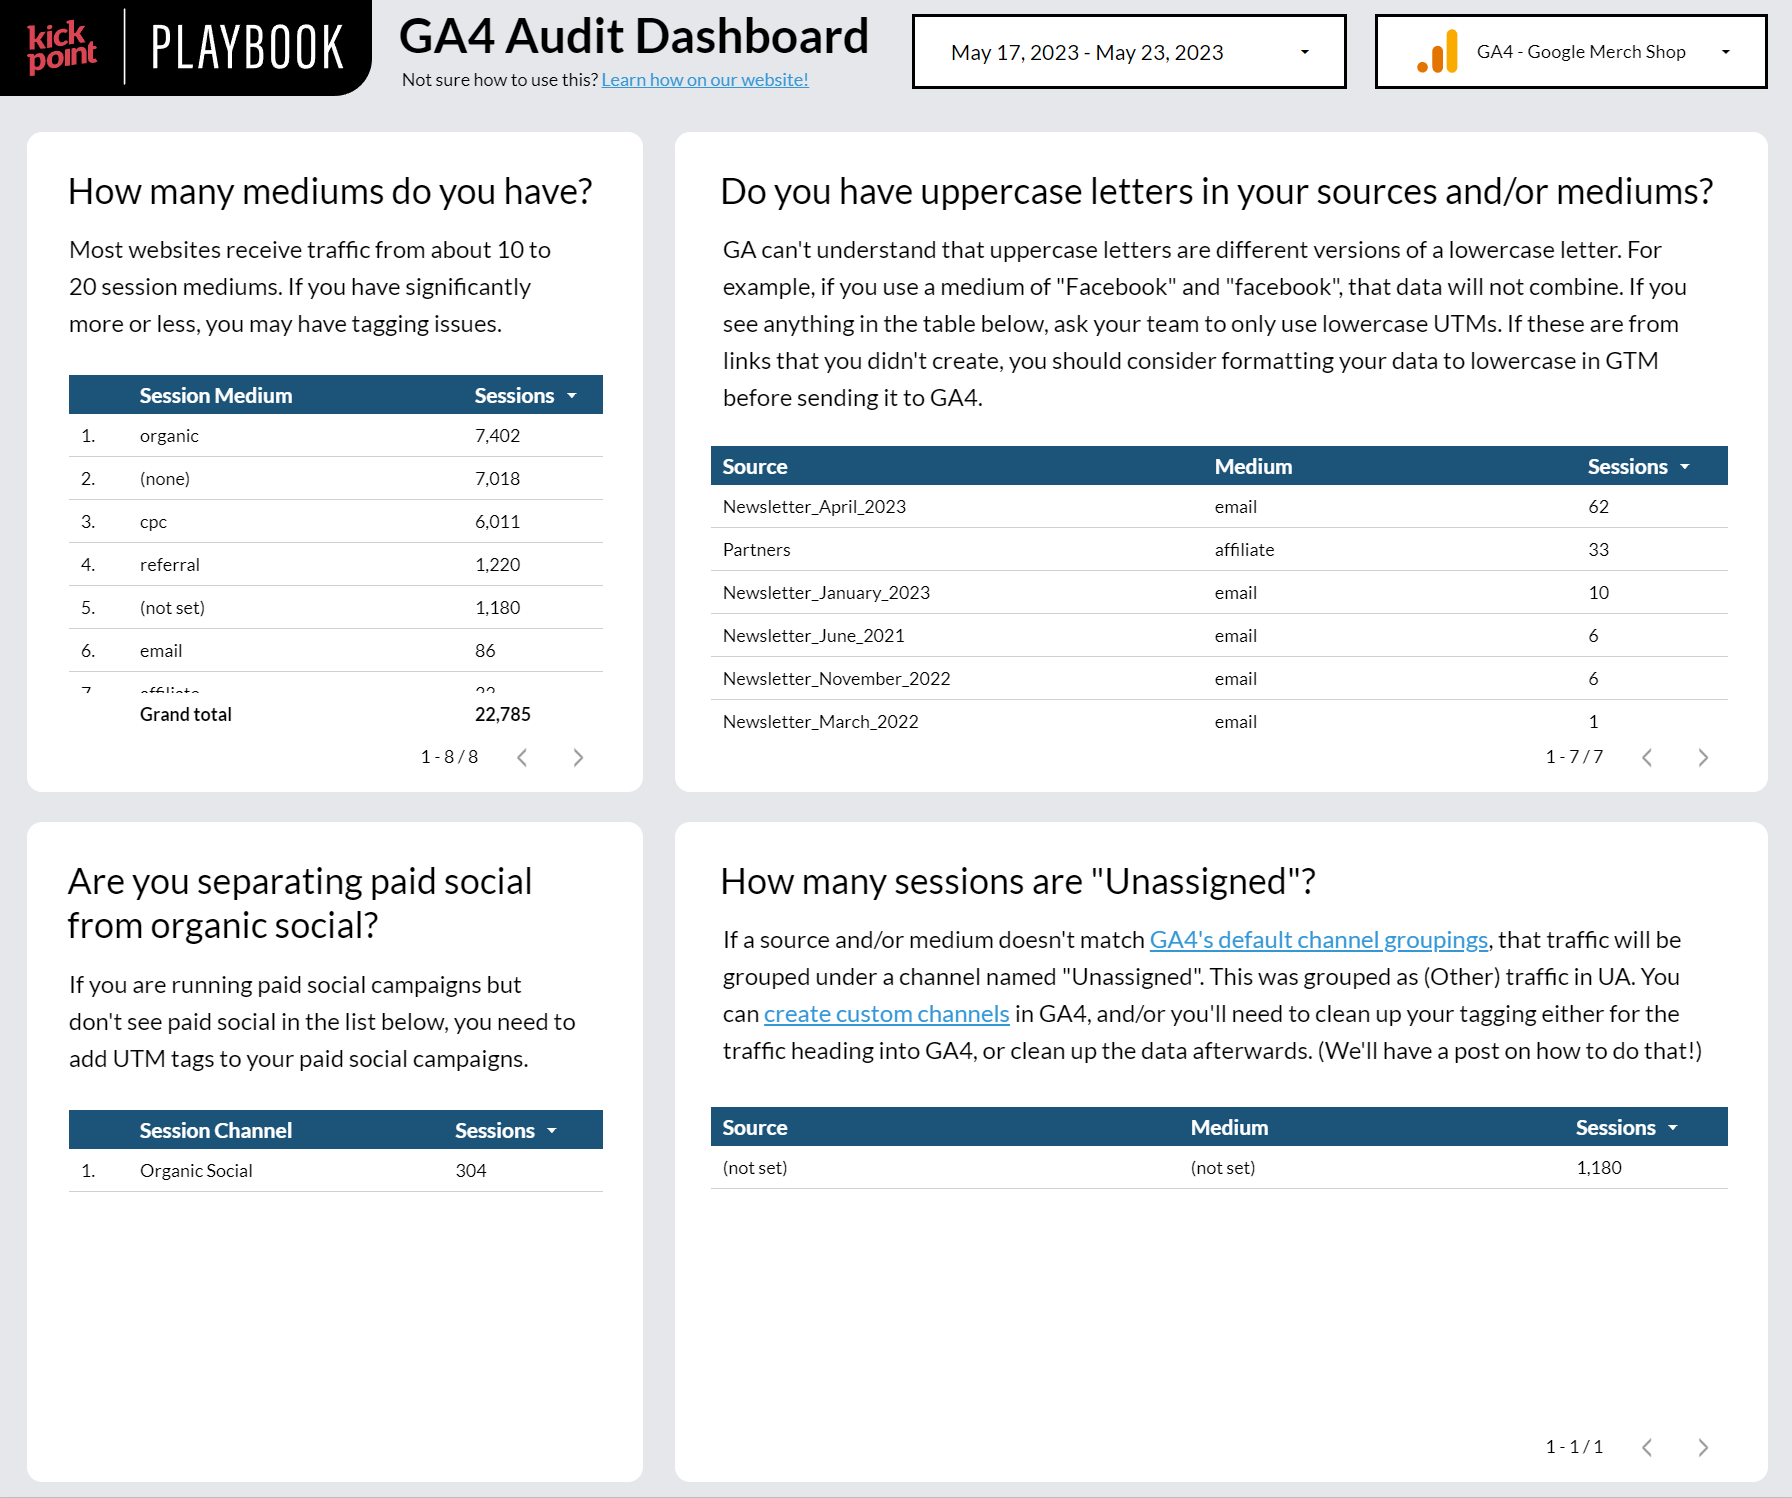 Tables with acquisition data in GA4 using a Looker Studio custom dashboard created by KP Playbook